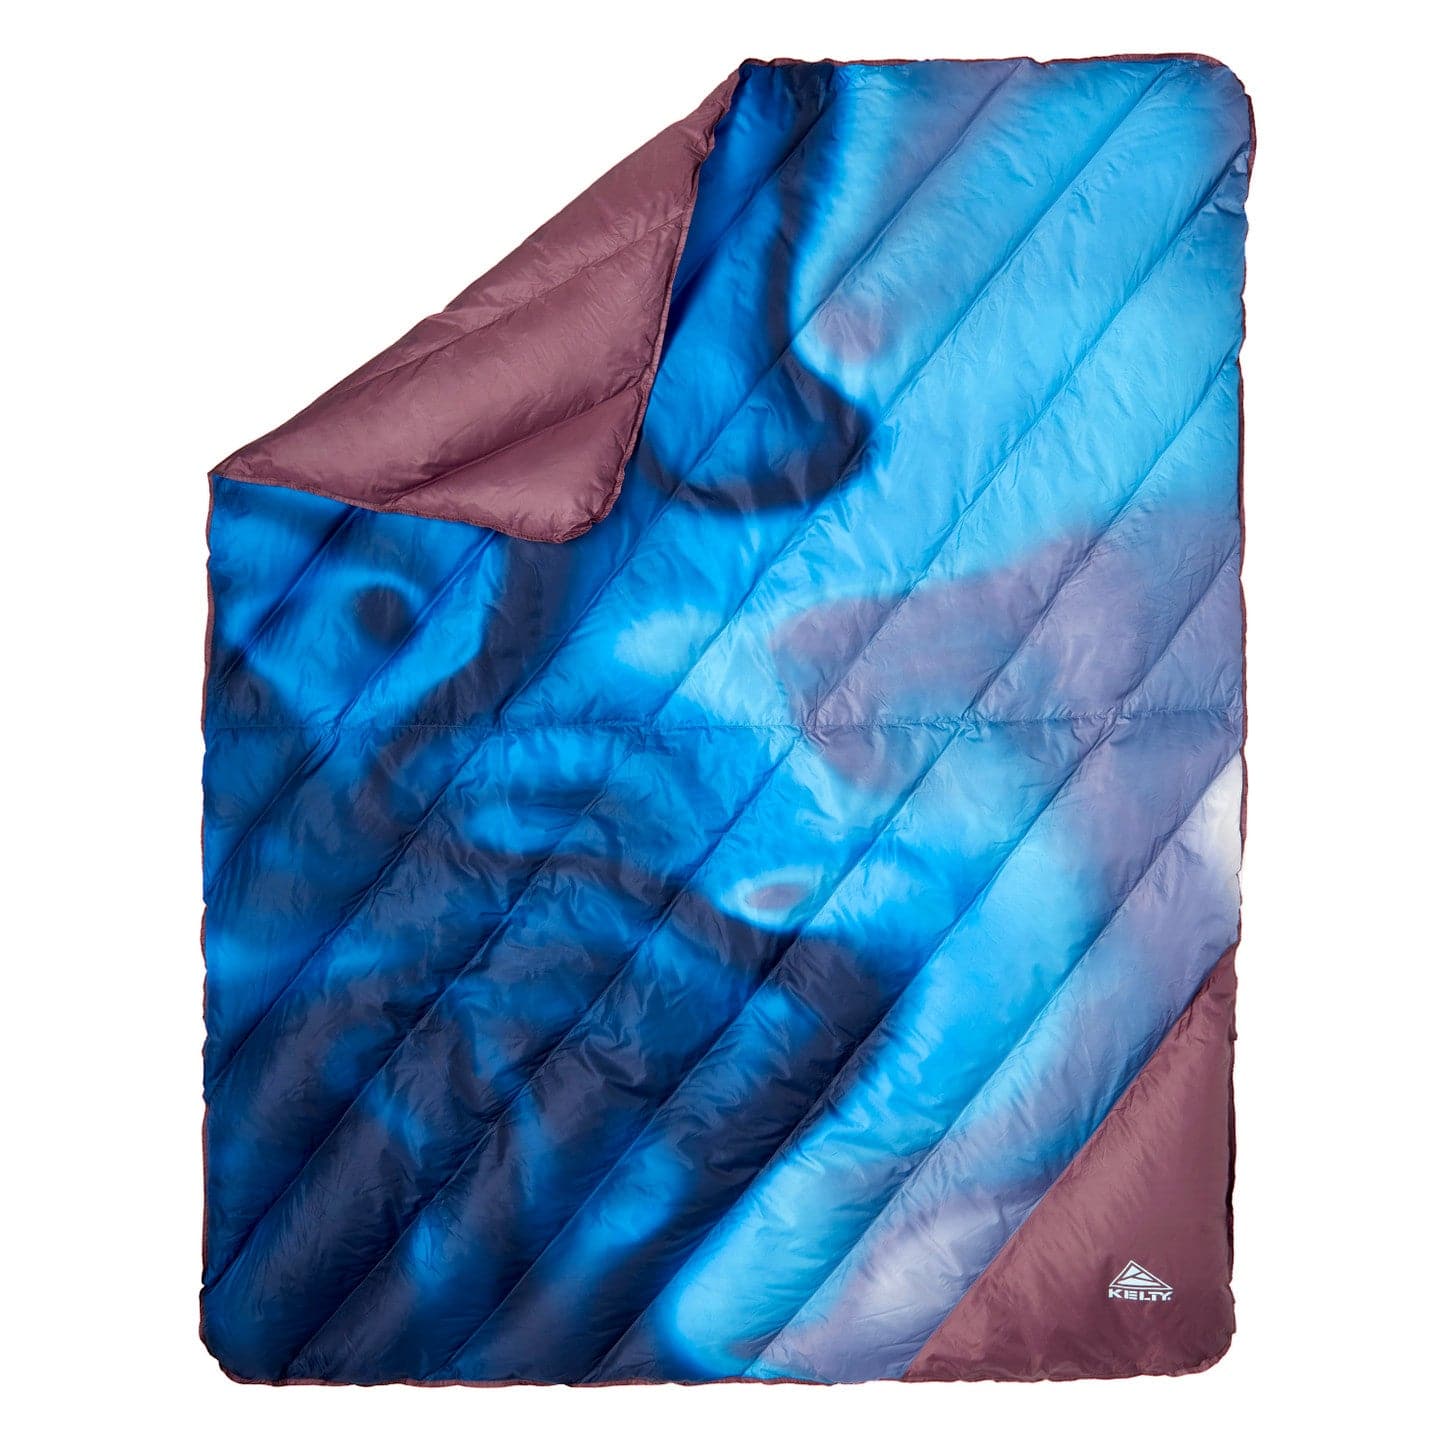 Featuring the Galactic Down Blanket down blanket manufactured by Kelty shown here from a second angle.